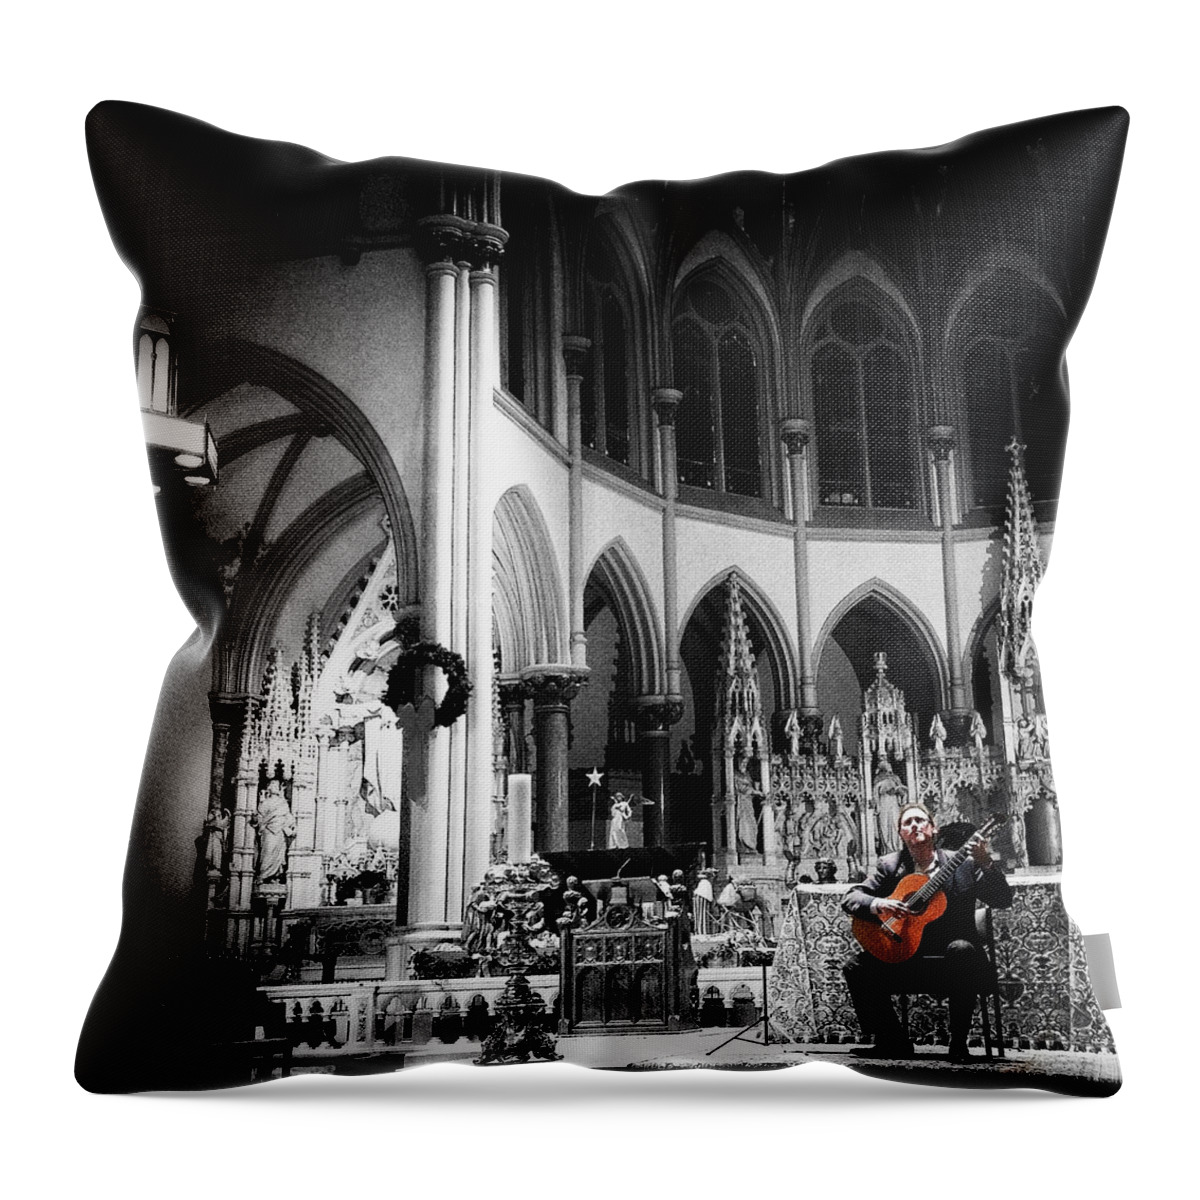 Musician Throw Pillow featuring the photograph Acoustic Grace by Natasha Marco